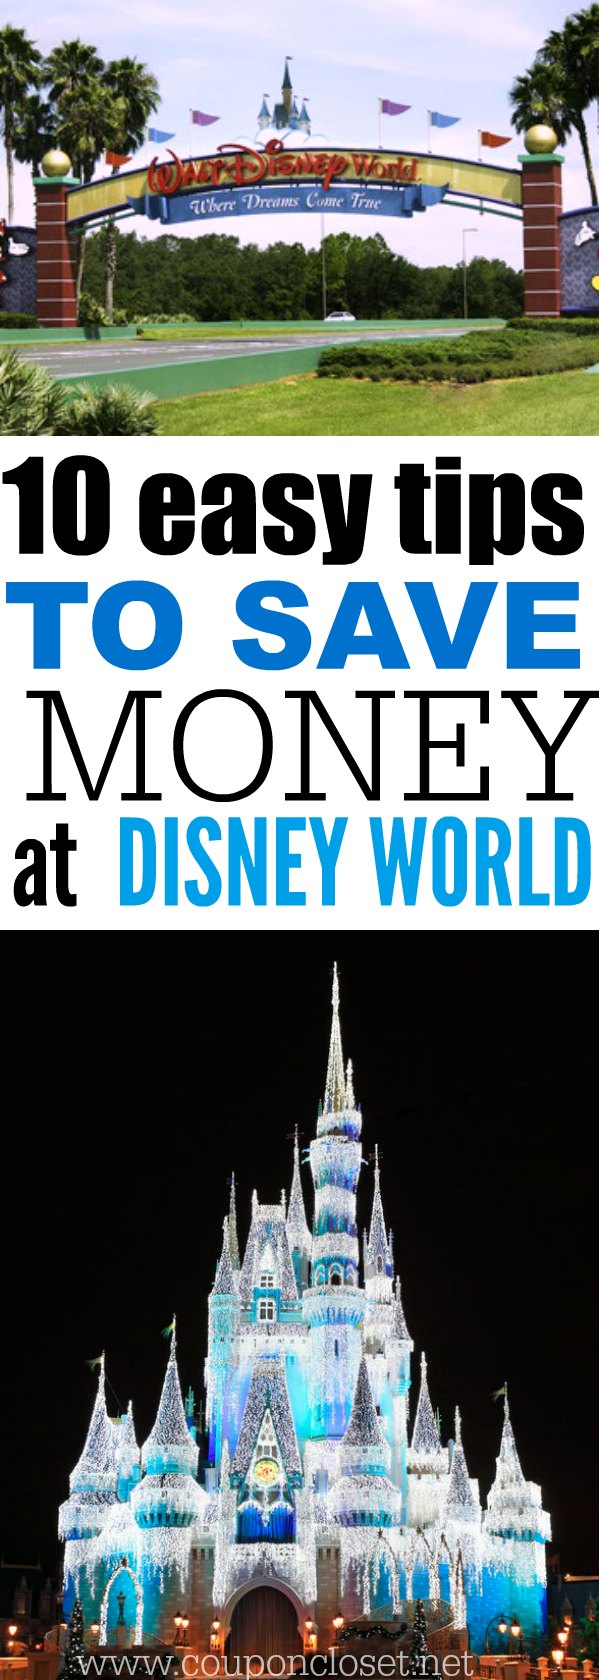 Save Money at Disney World - here are 10 easy money saving tips that you haven't thought of to save money inside Disney world.